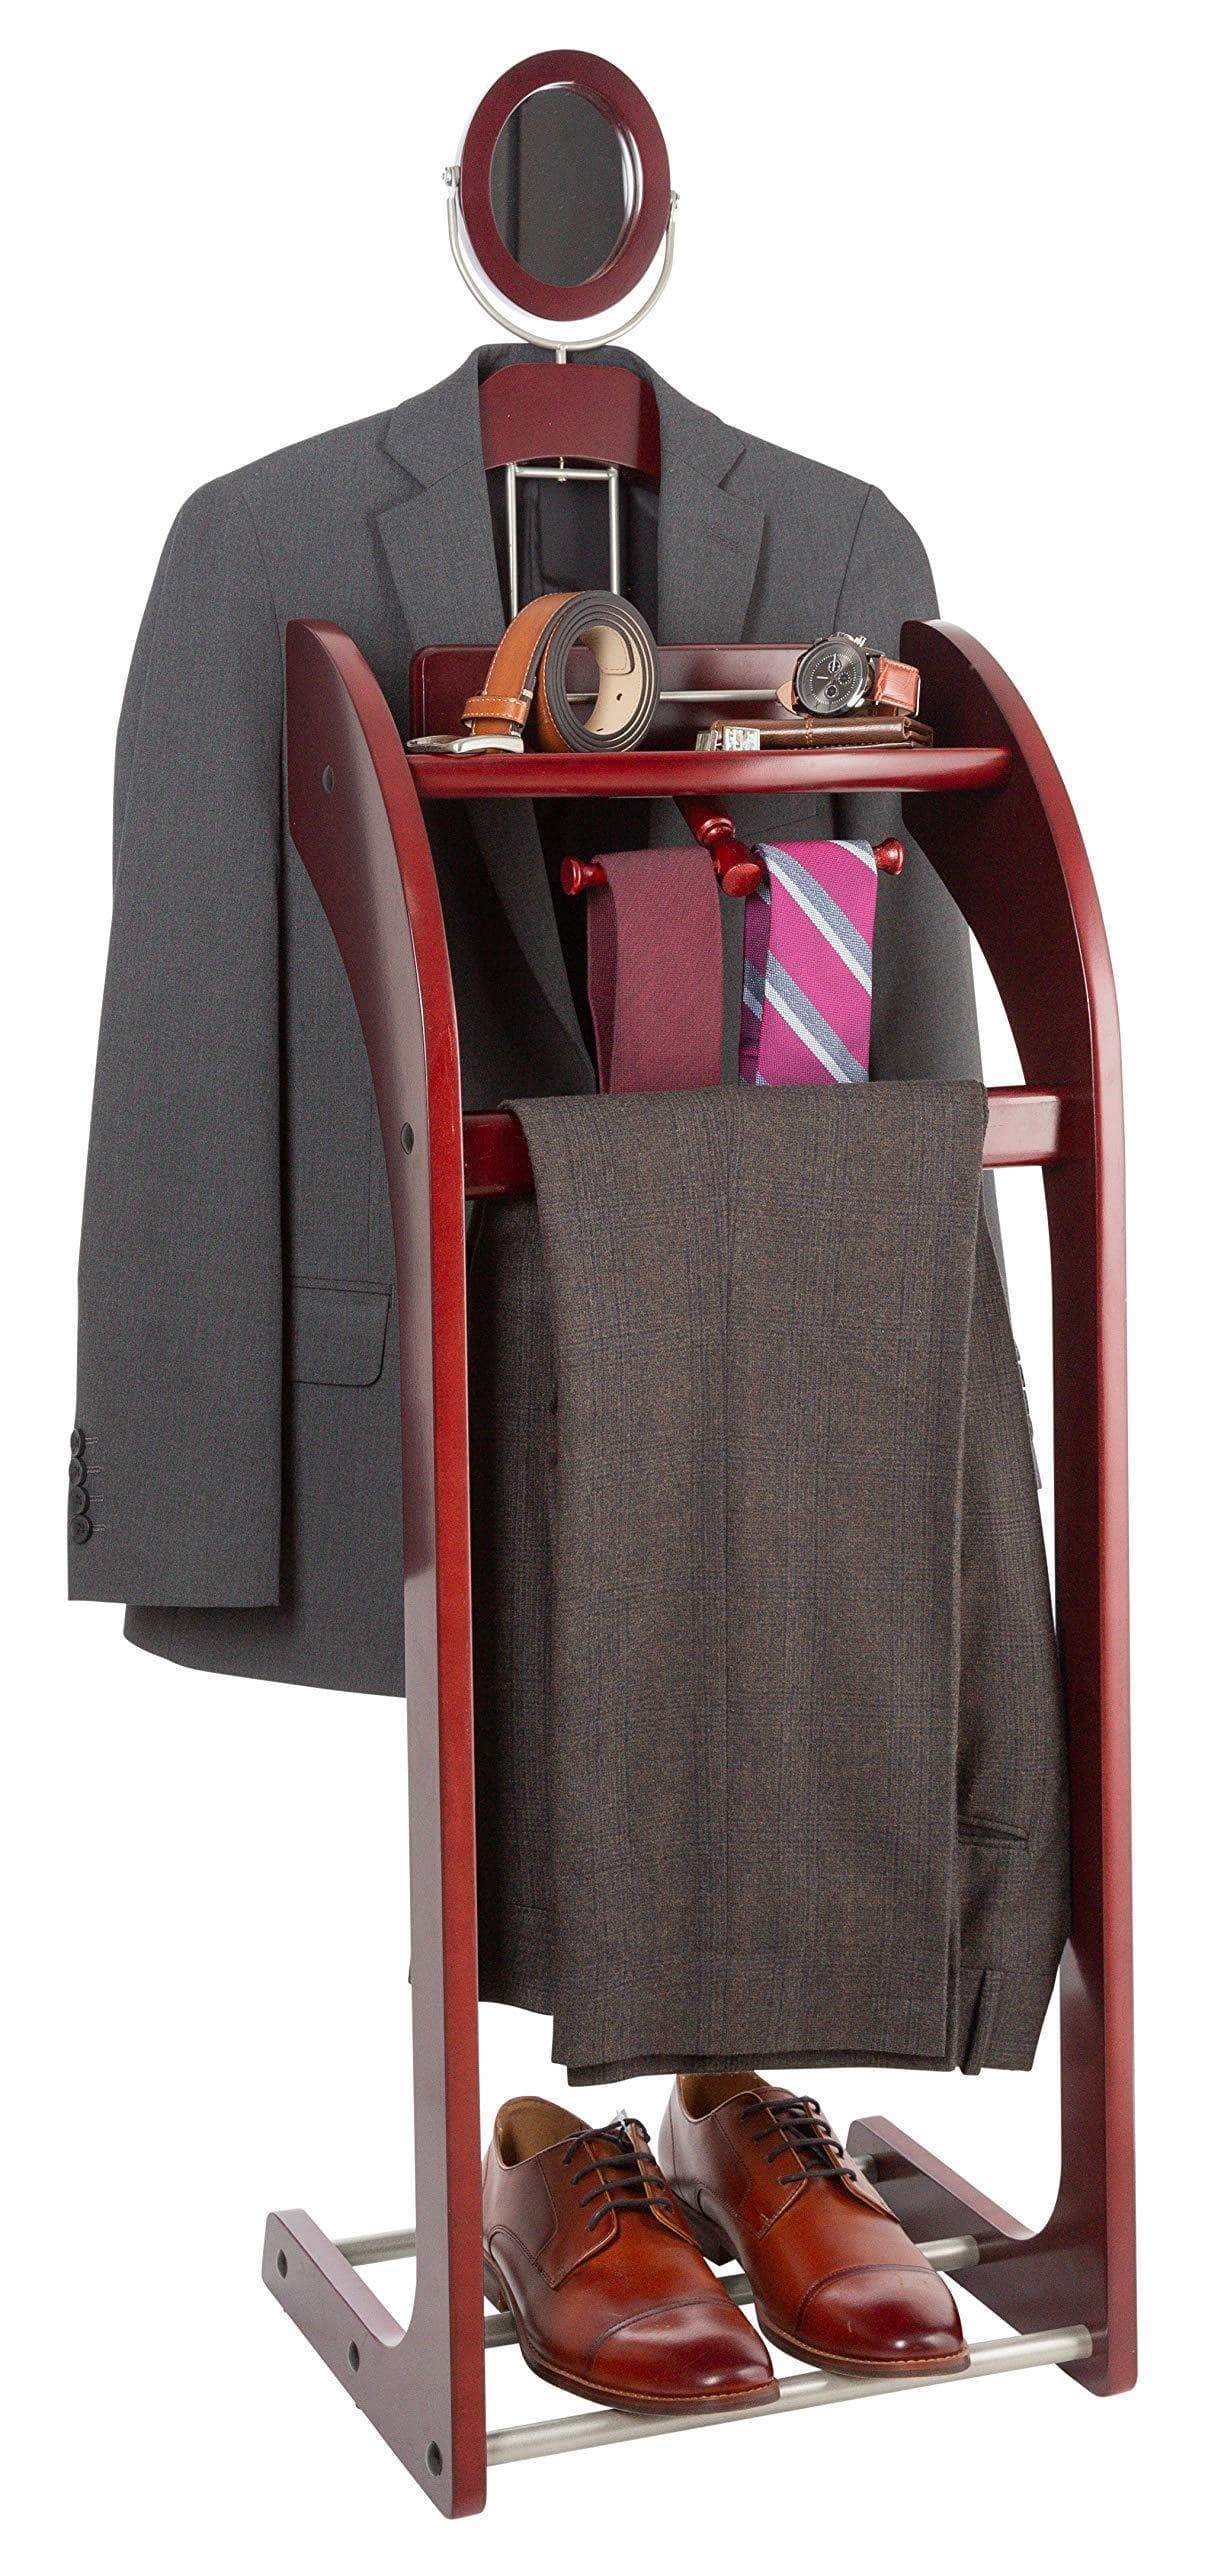 Clothes Valet Stand with Mirror - Beautiful Solid Mahogany Hardwood Wardrobe Valet Stand for Clothes with Trouser Bar, Jacket Hanger, Tray Organizer, Tie & Belt Hook and Shoe Rack